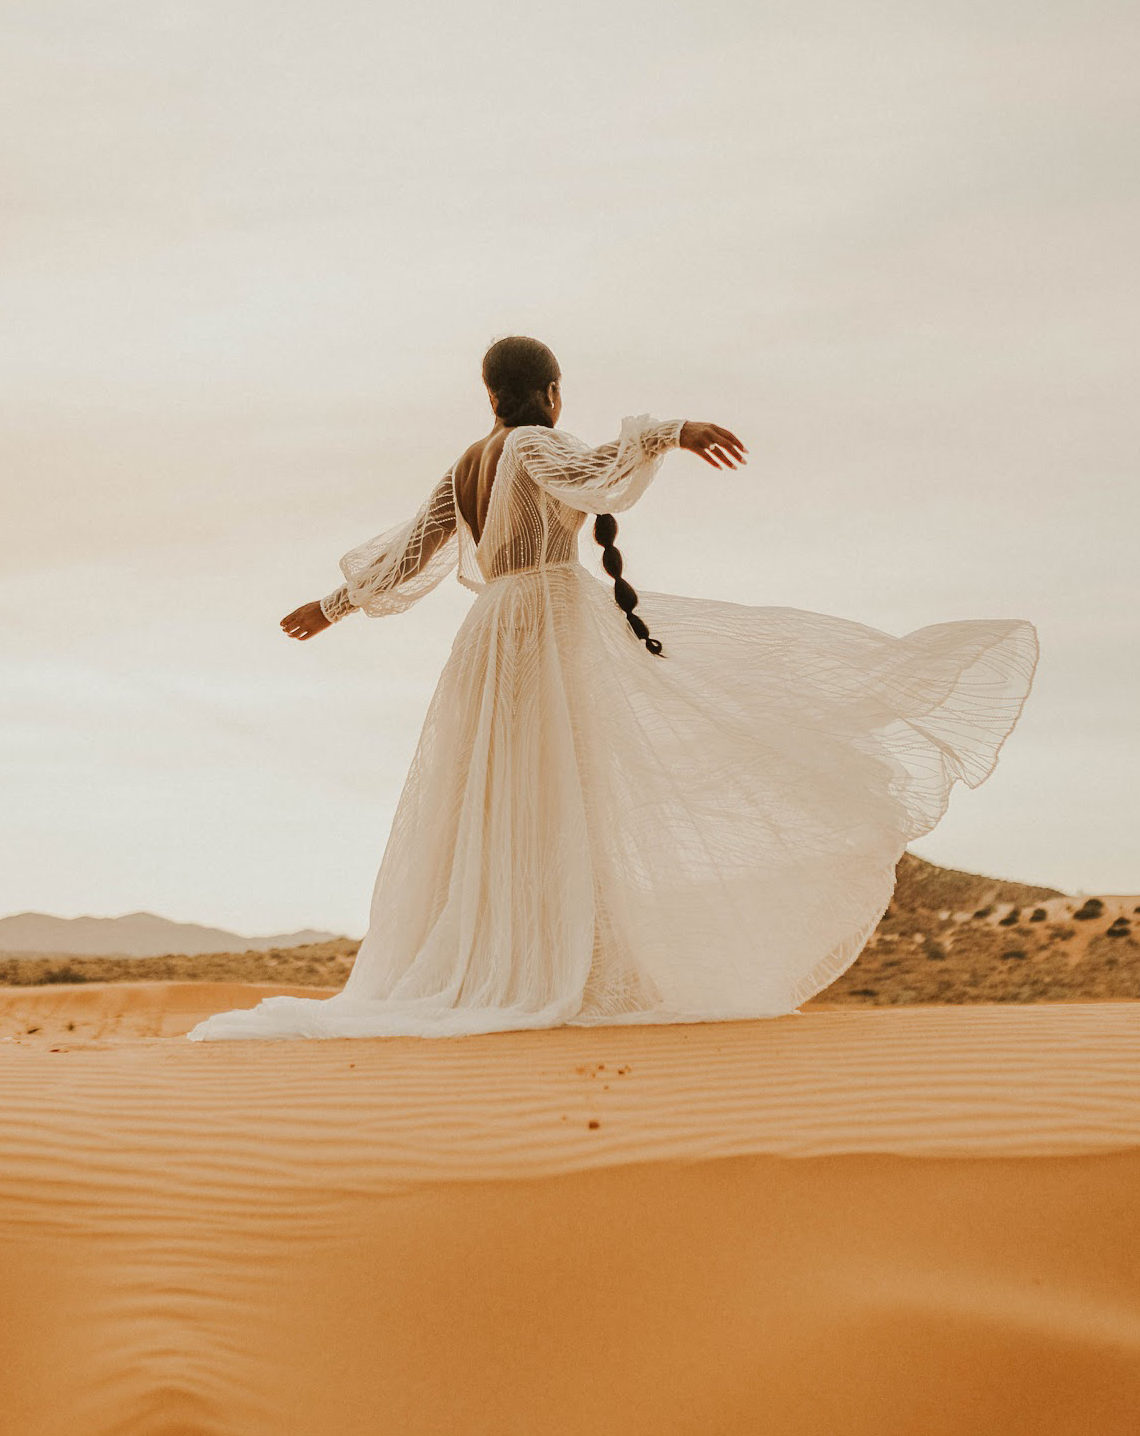 Woman wearing a white dress in the middle of a dessert